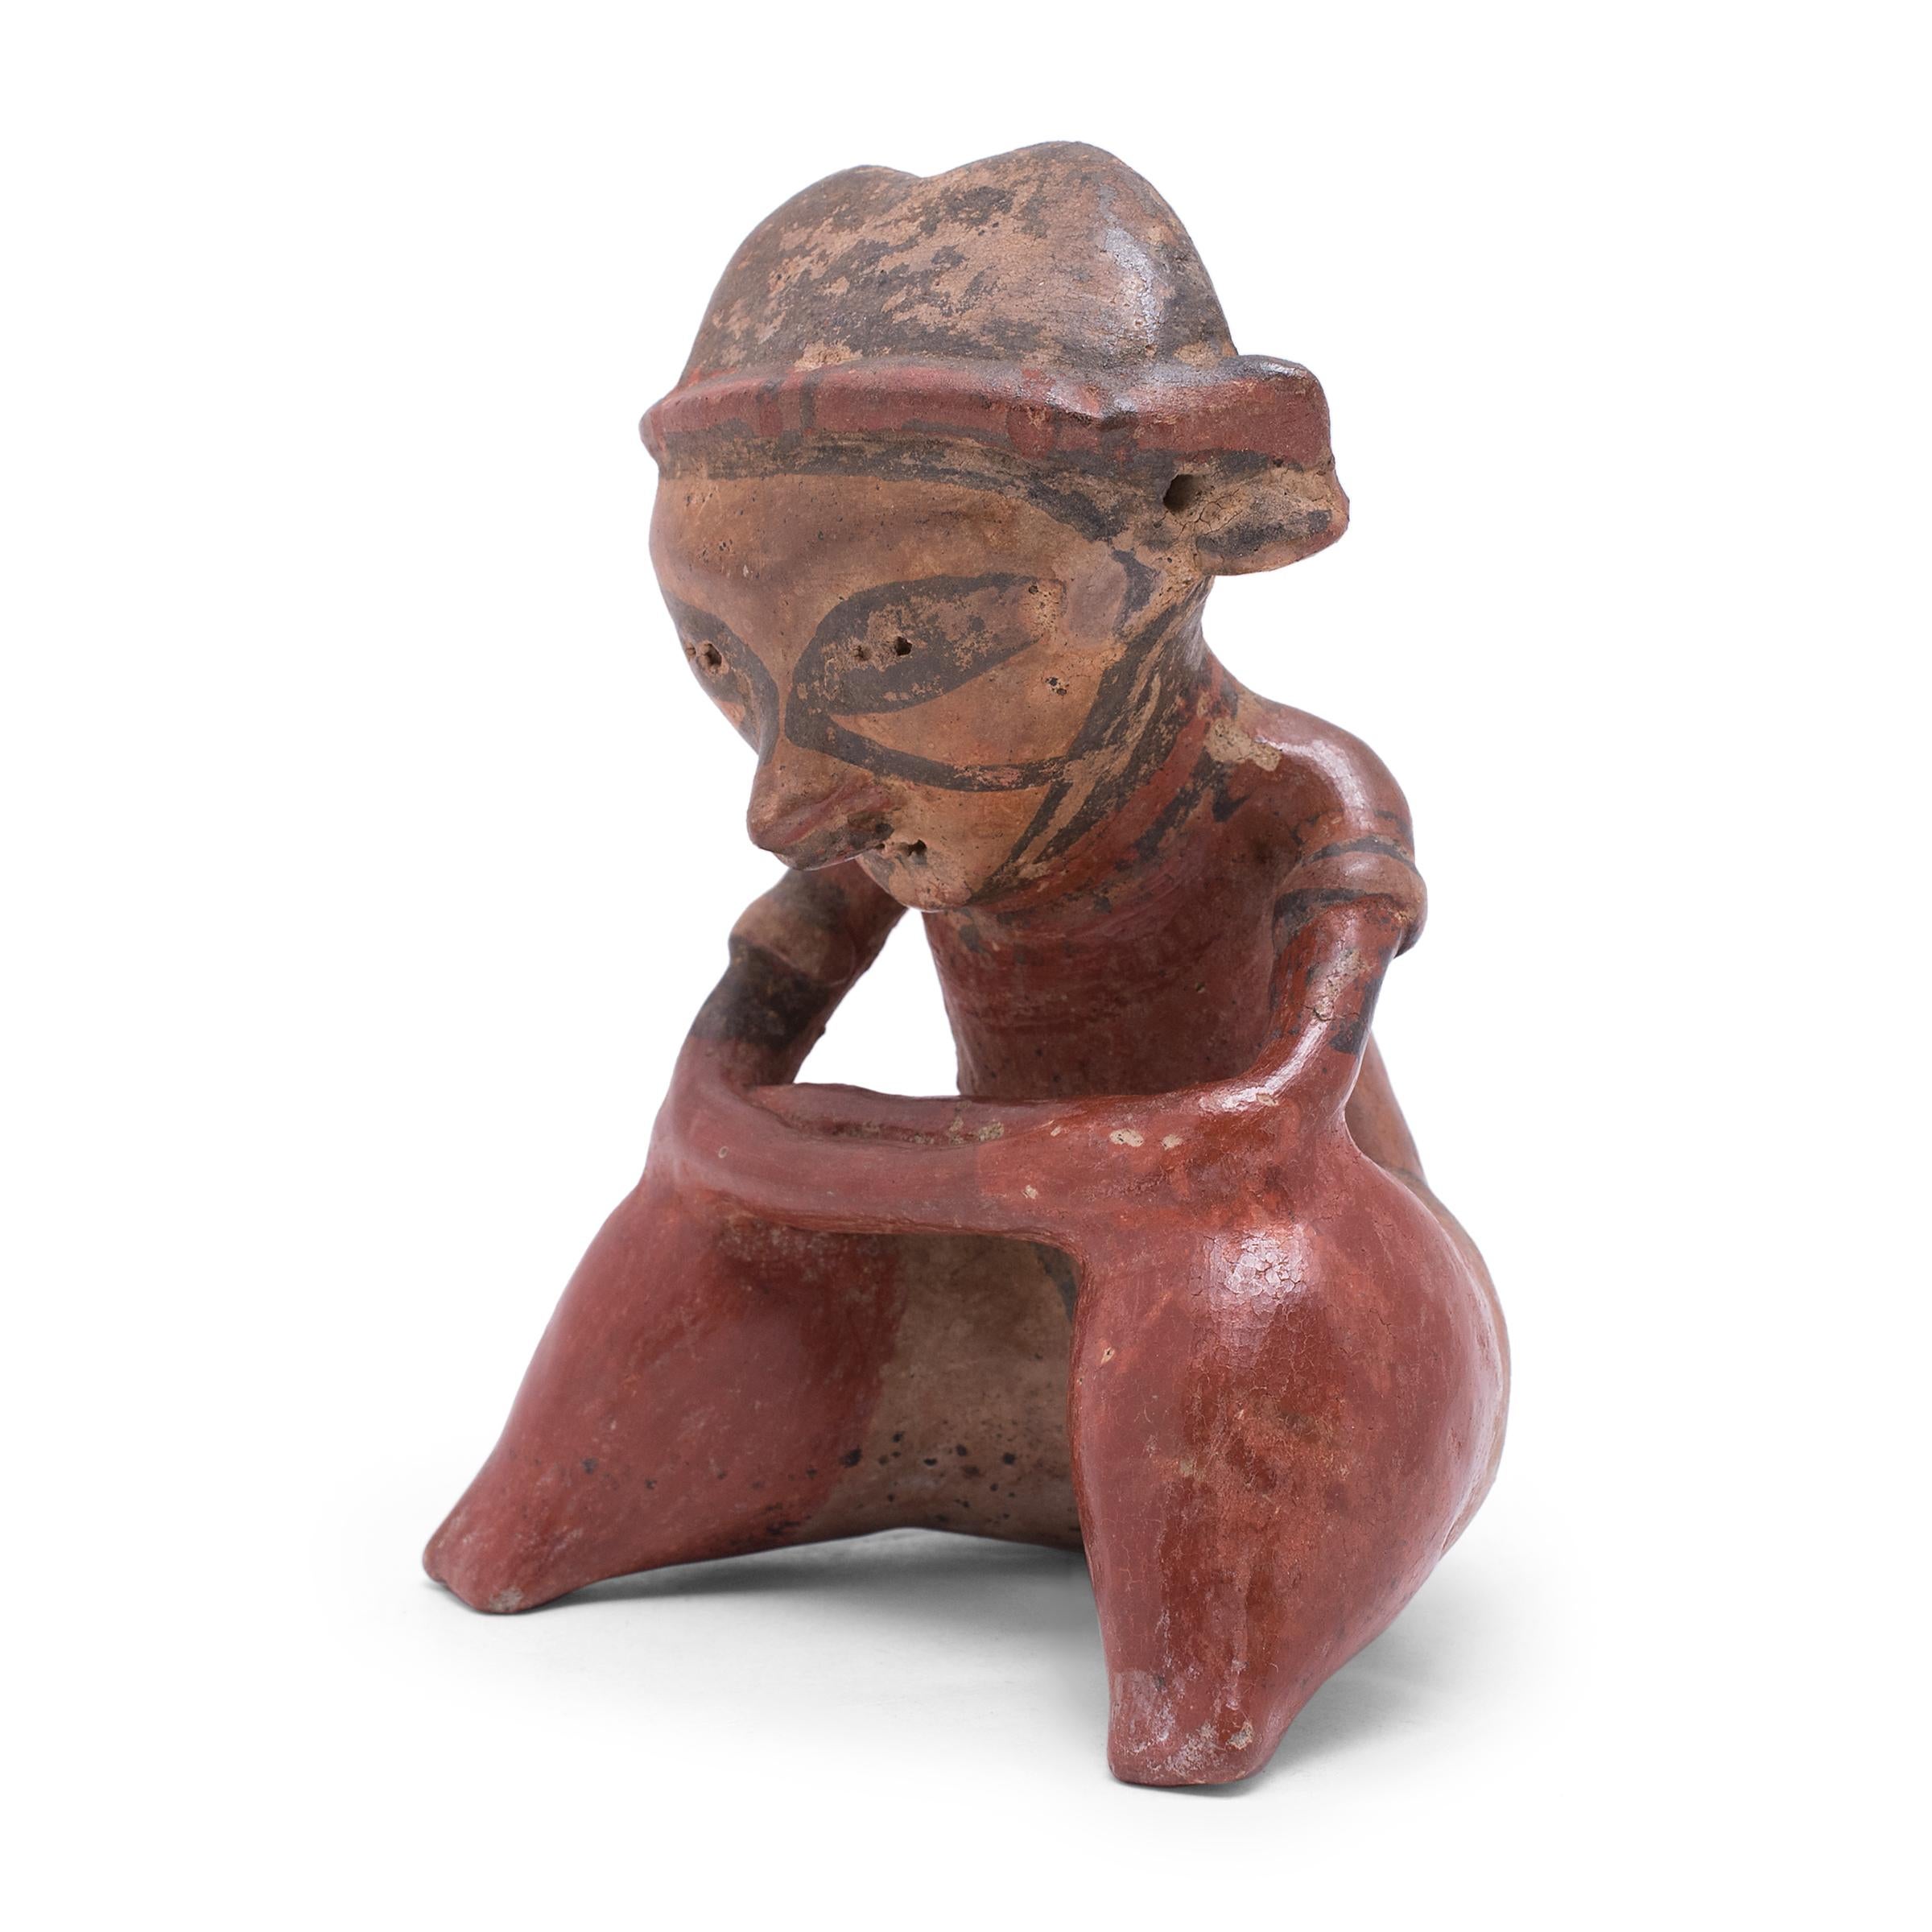 This seated ceramic figure is attributed to the ancient Nayarit region of Mexico and was likely used as a ritual or burial offering. The ceramic works of this style, known as Chinesco figures, are often distinguished by puffy, slit-like eyes blended